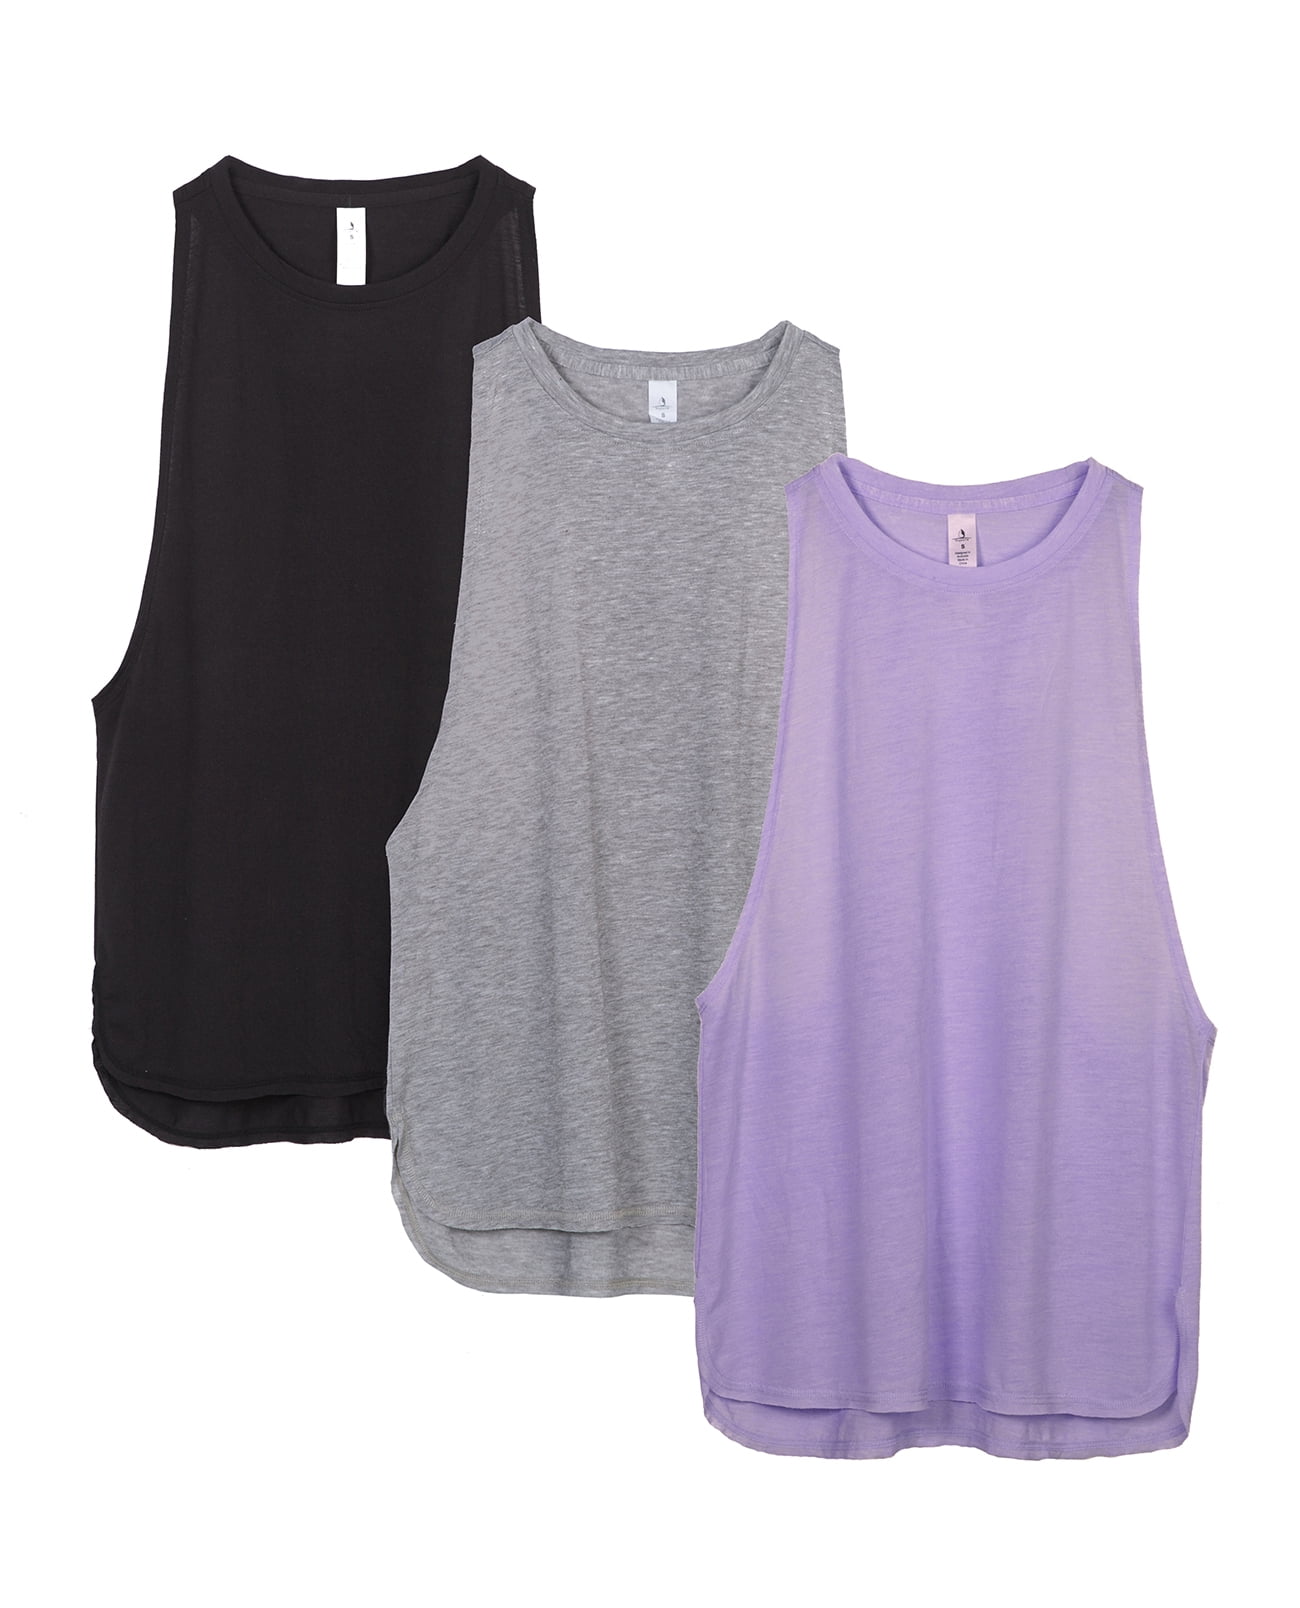 Racerback Yoga Tops Exercise Gym Shirts 3-Pack icyzone Workout Running Tank Top for Women